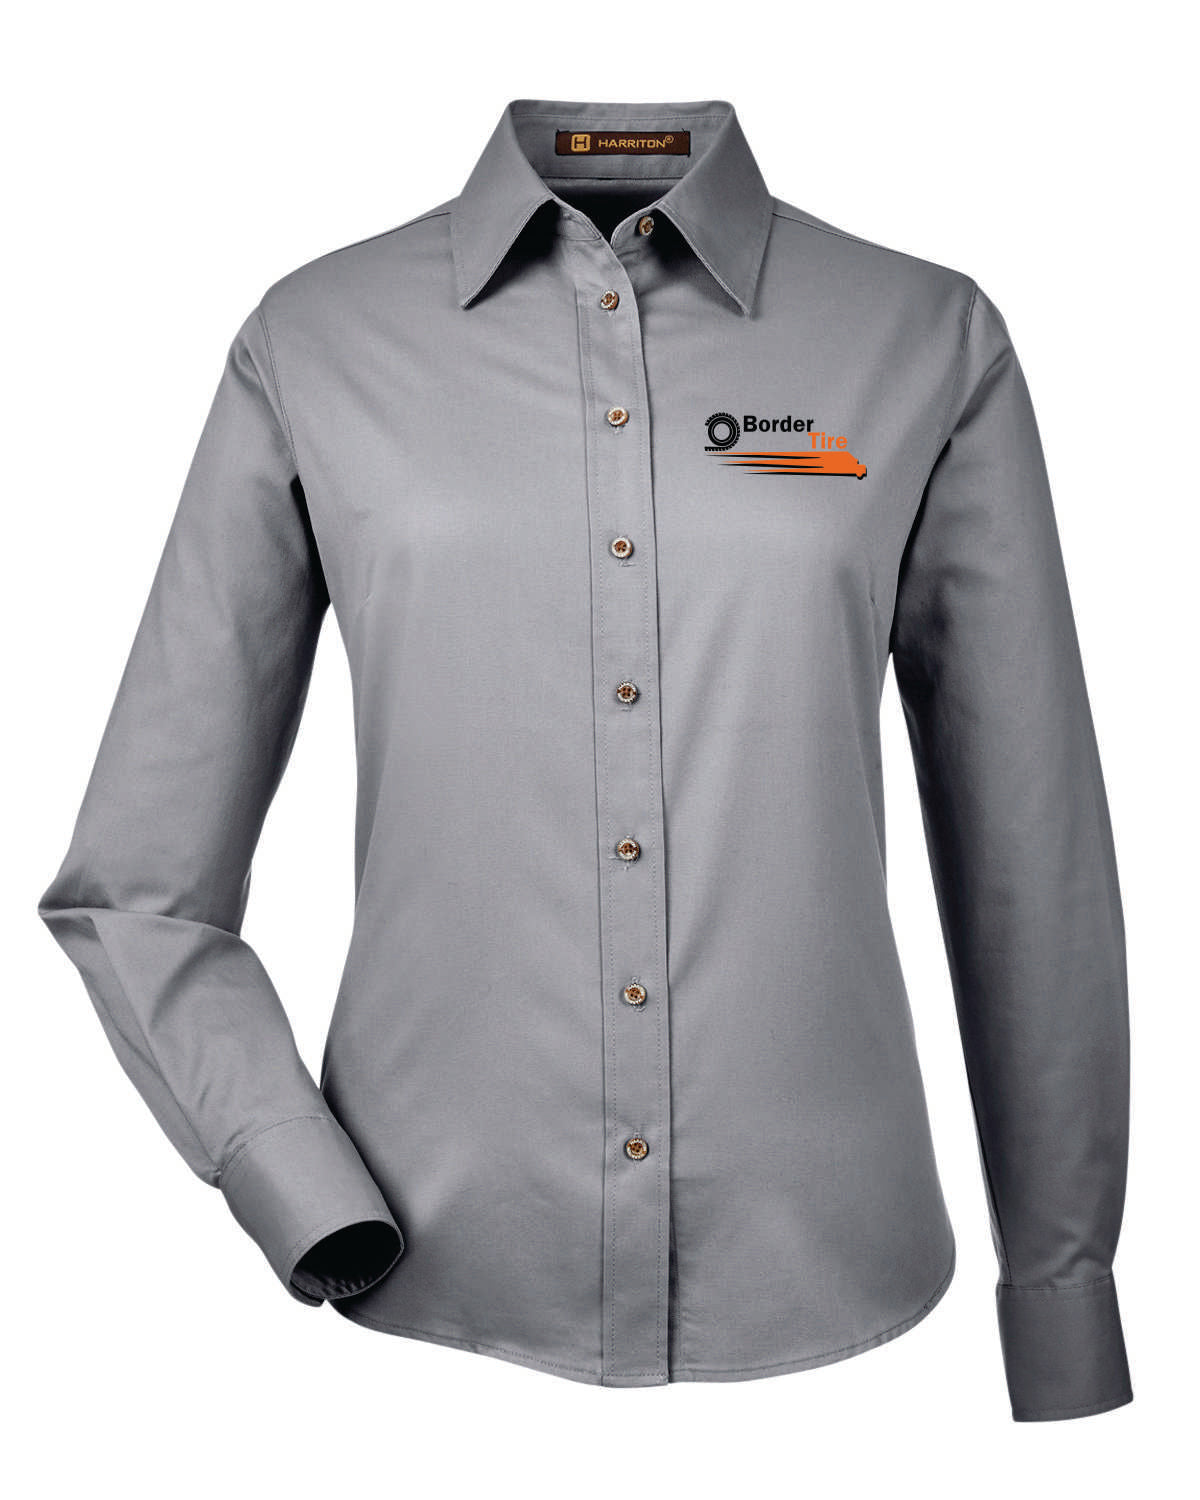 Border Tire Ladies' Easy Blend™ Long-Sleeve Twill Shirt with Stain-Release